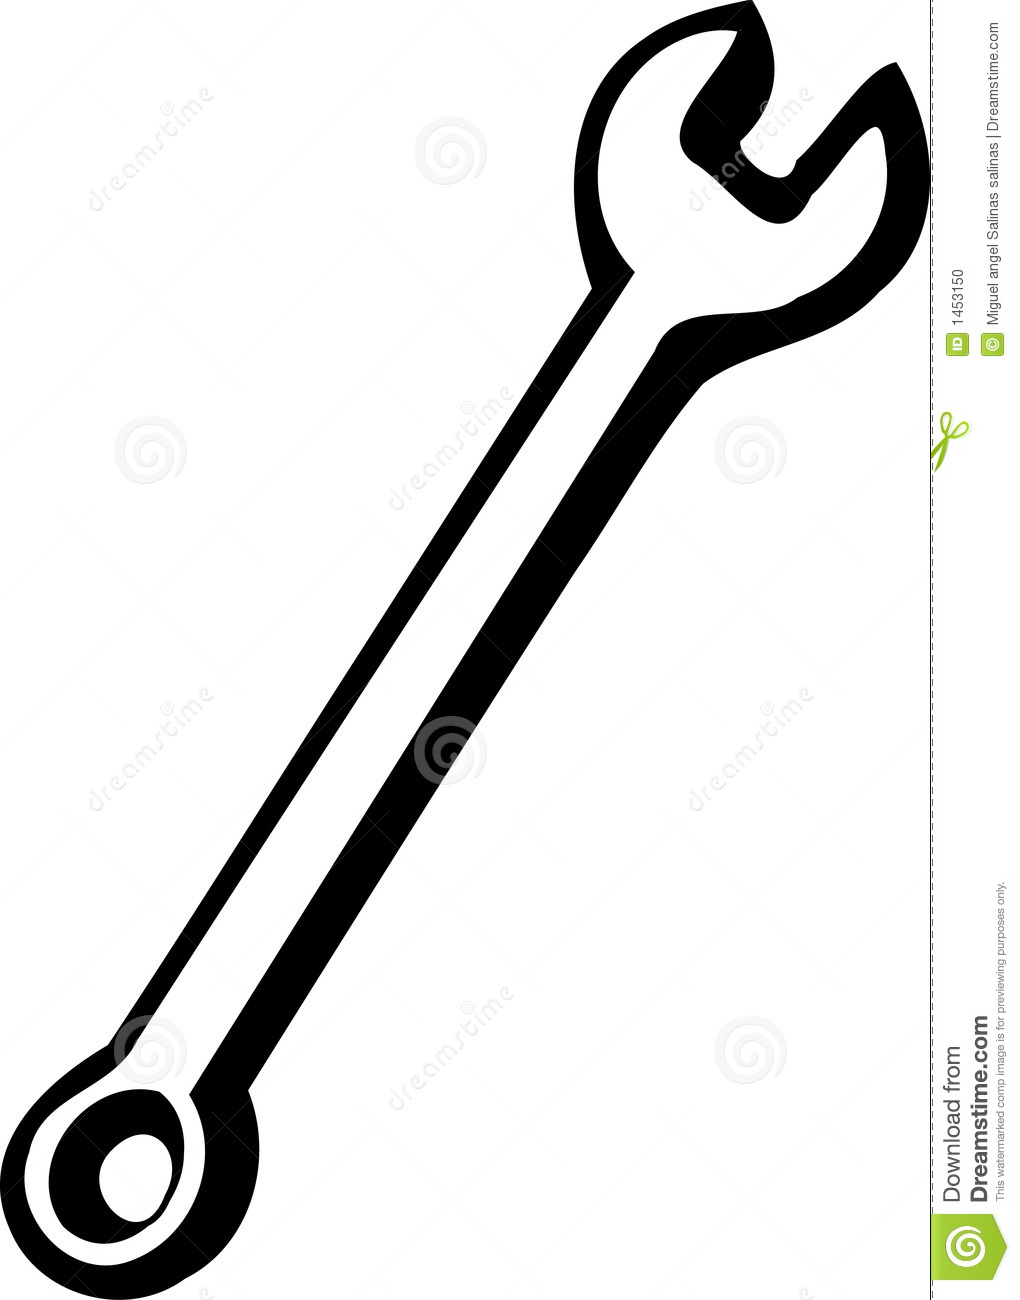 Wrench Clipart Wrench Vector Illustration